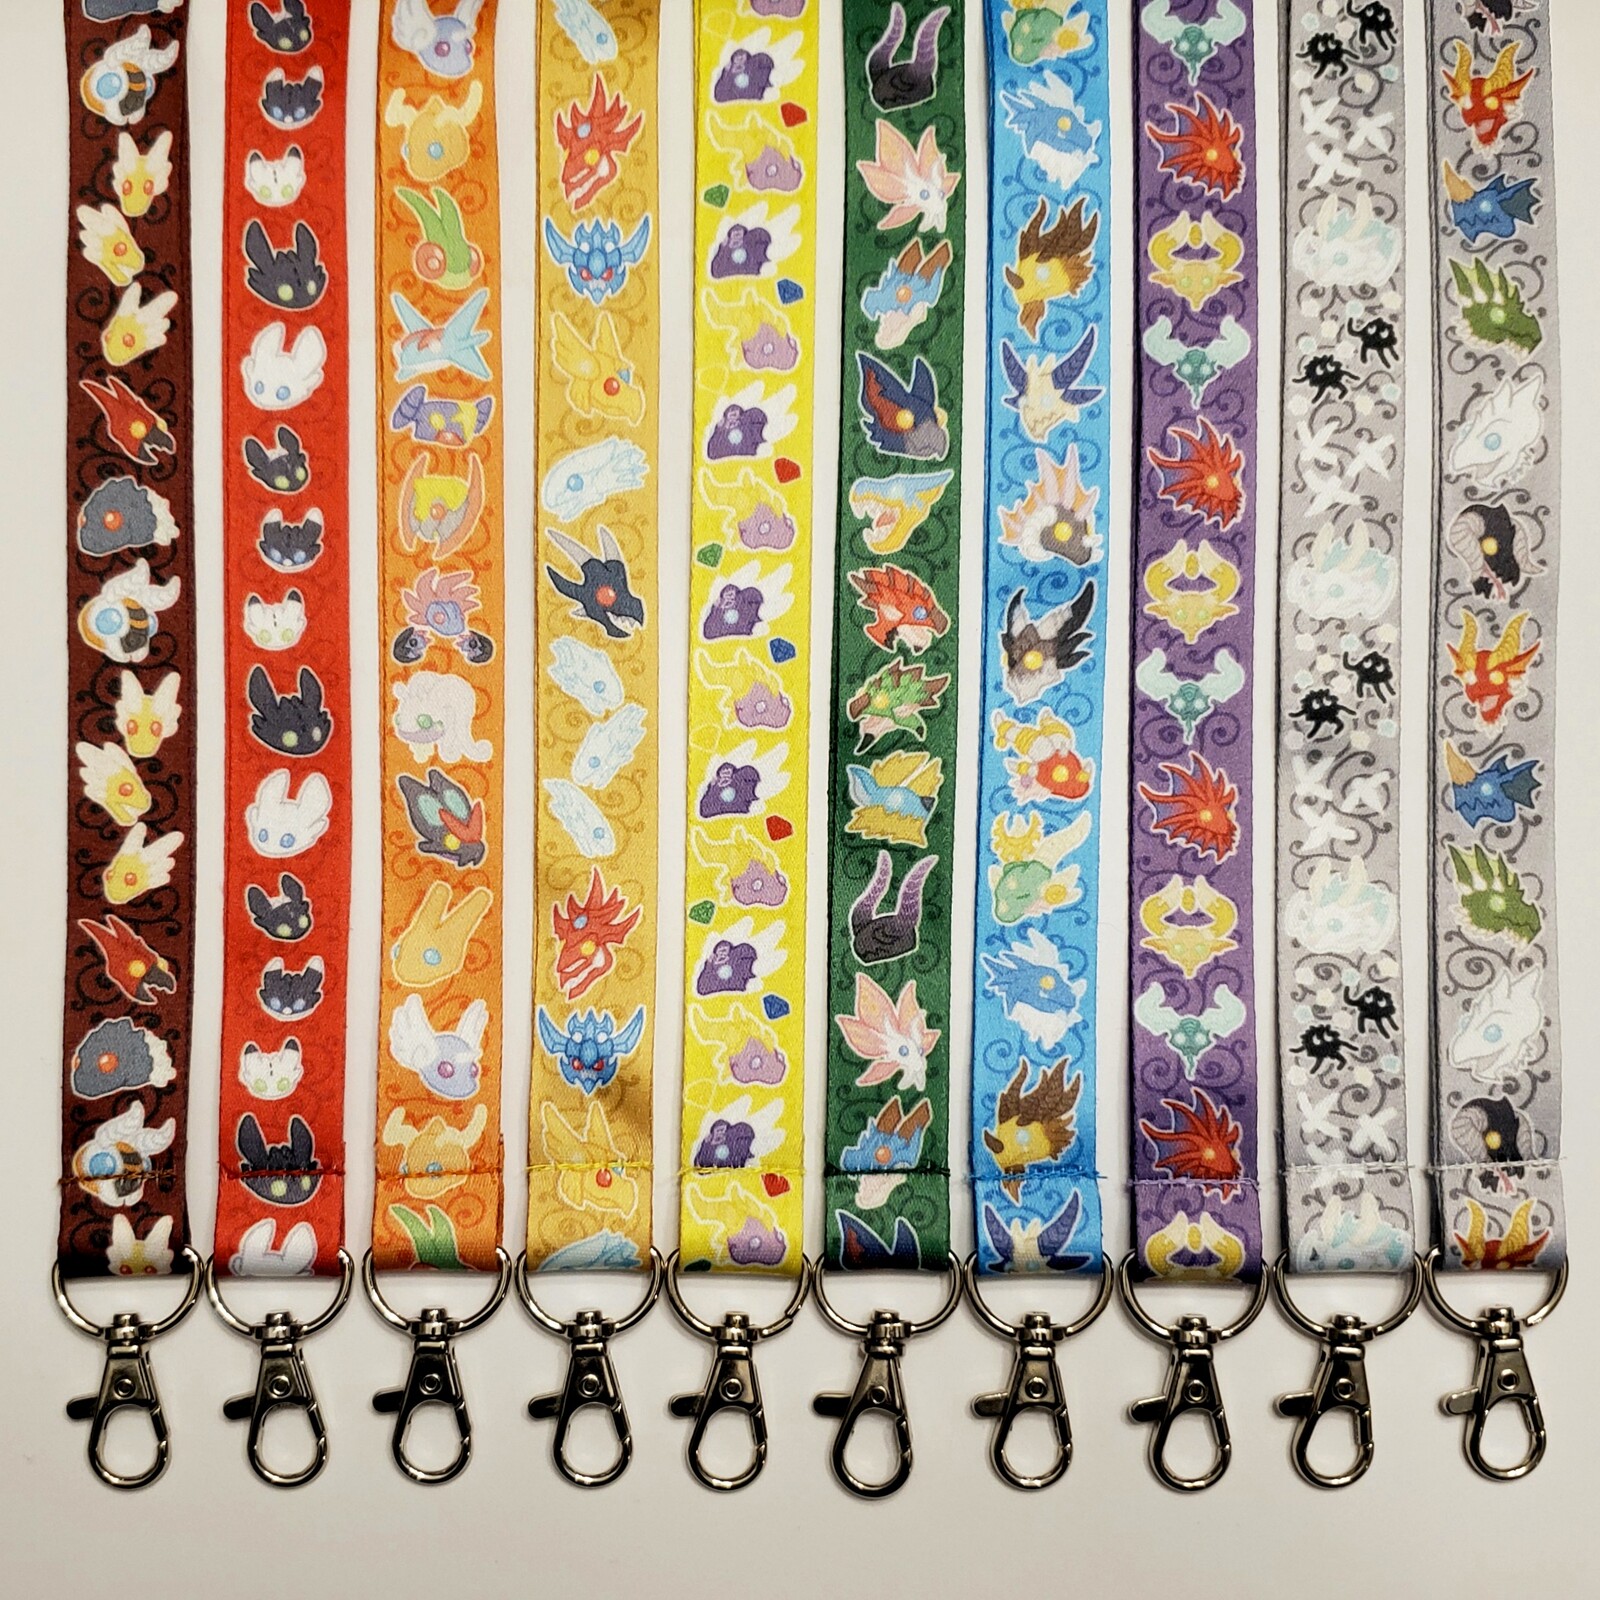 Lanyards with dragons from various series.